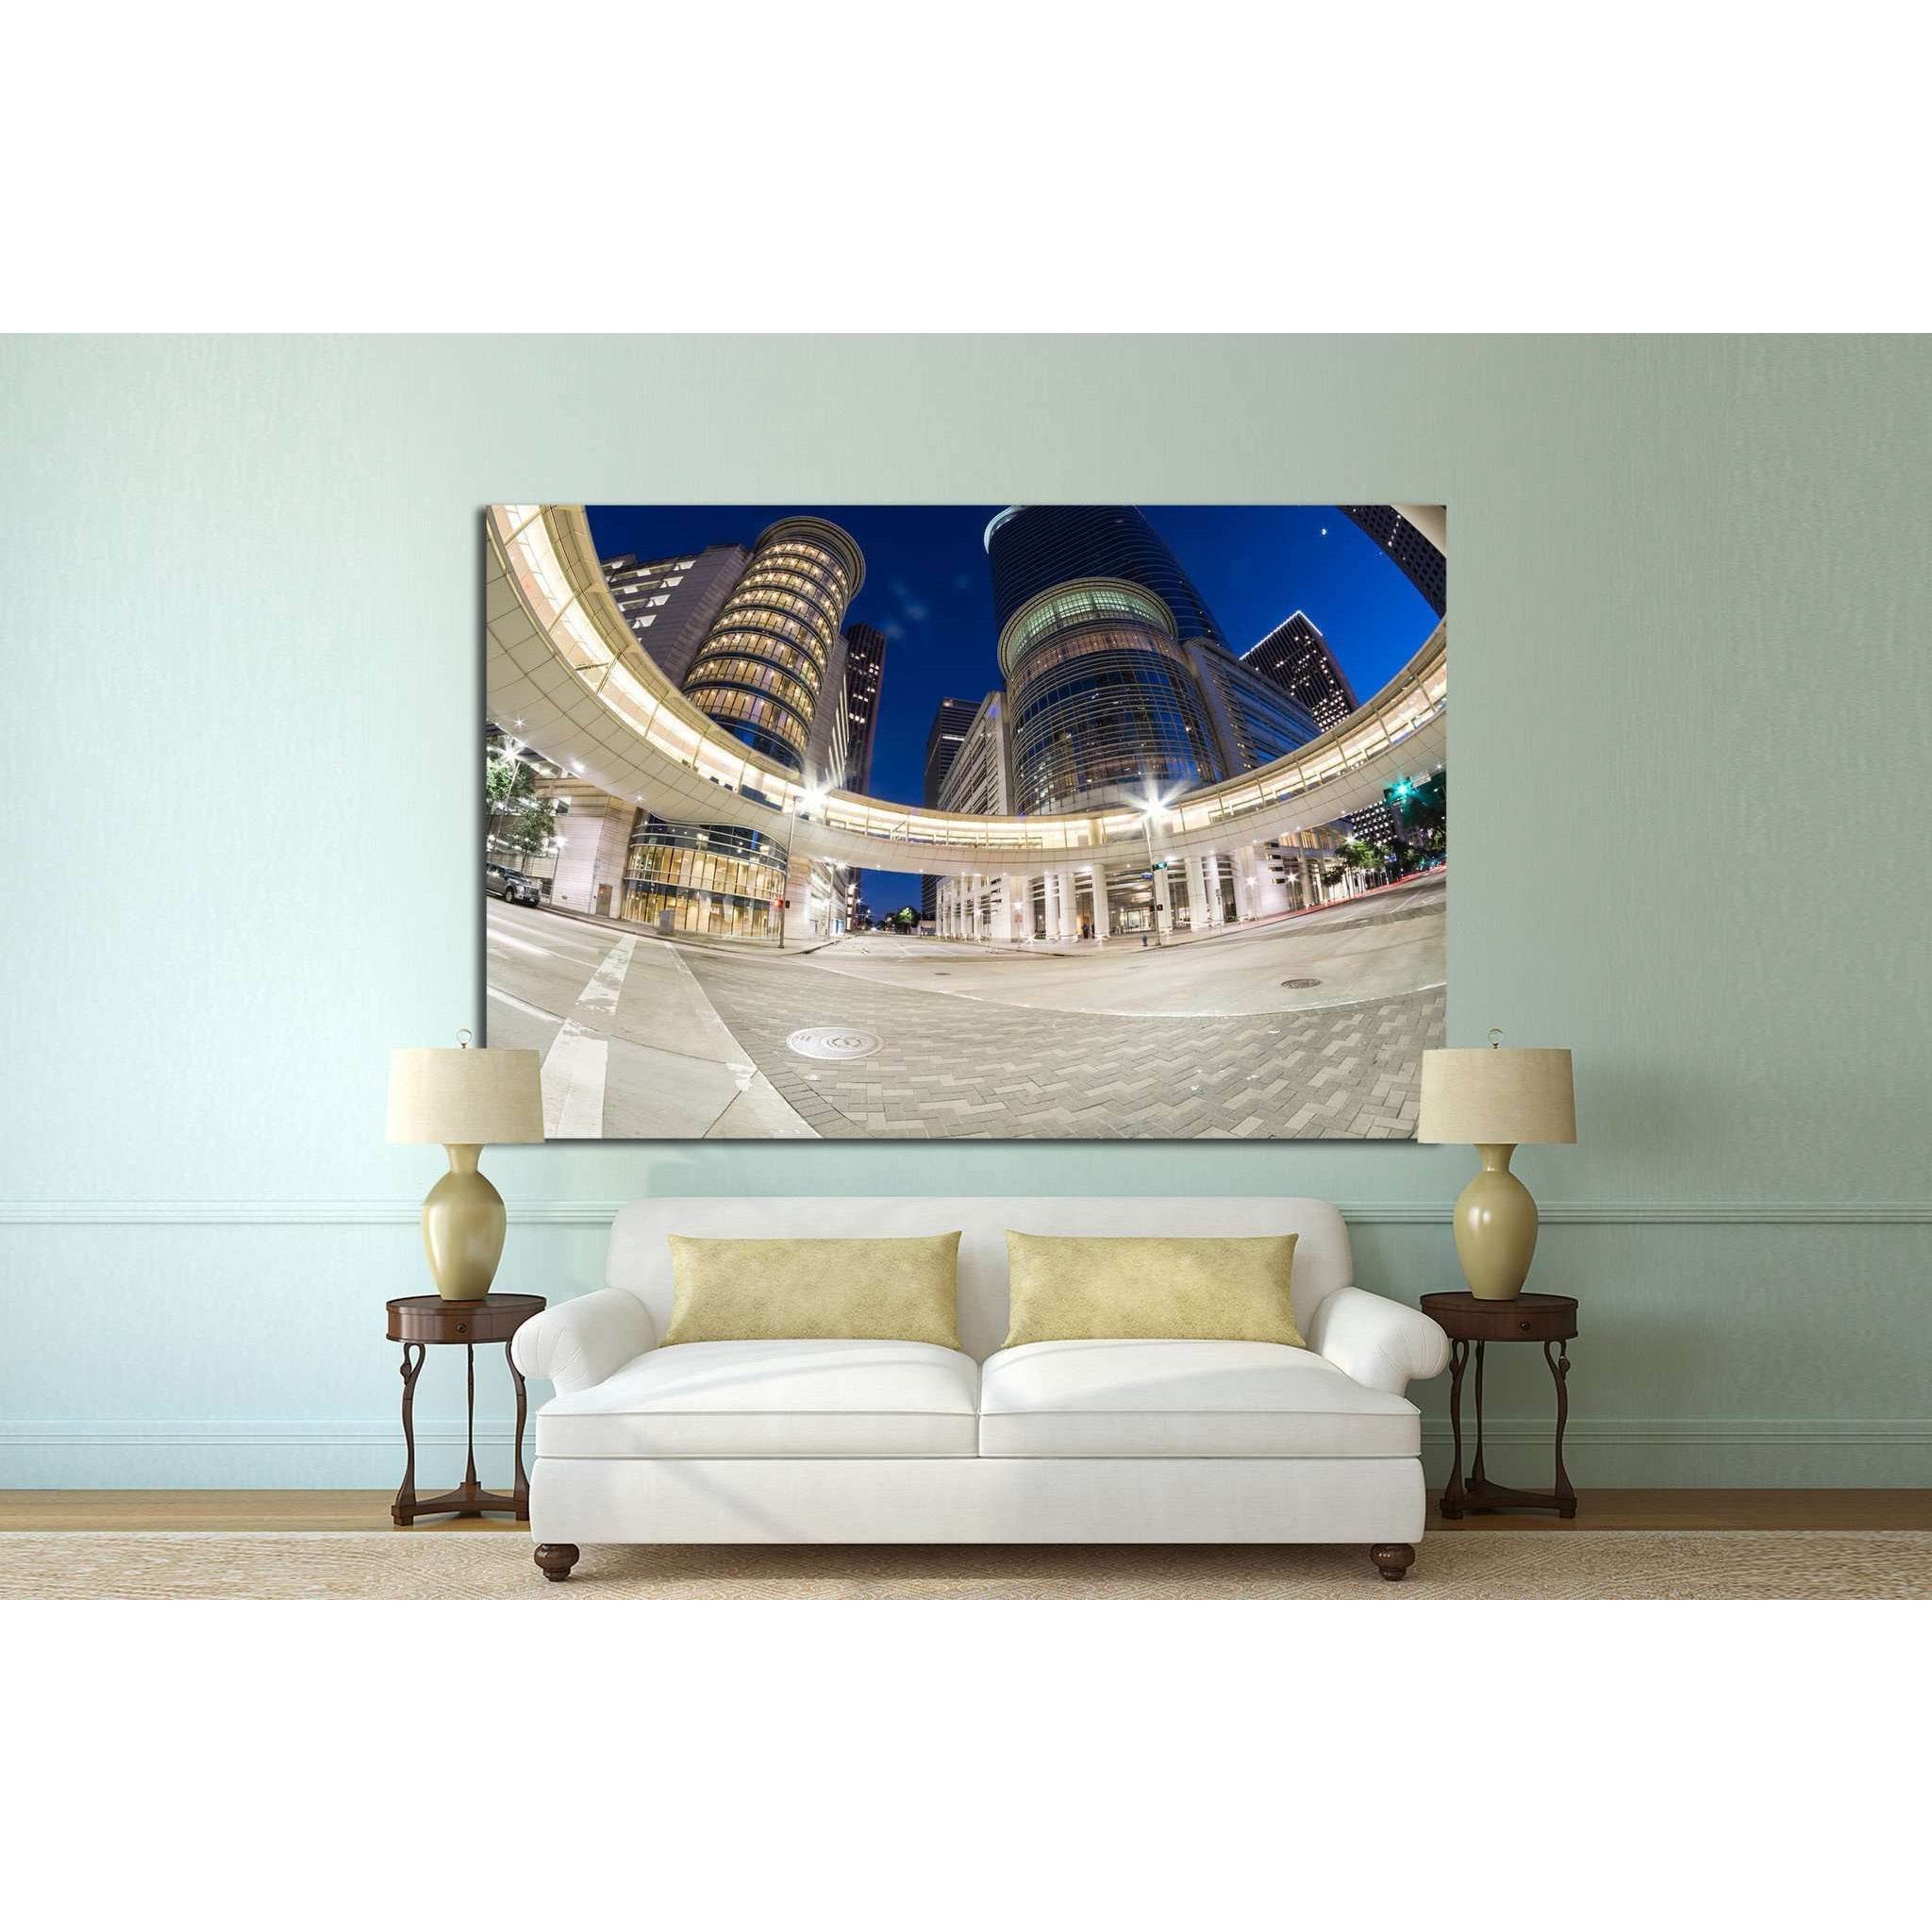 Houston with modern skyscrapers №1009 Ready to Hang Canvas Print